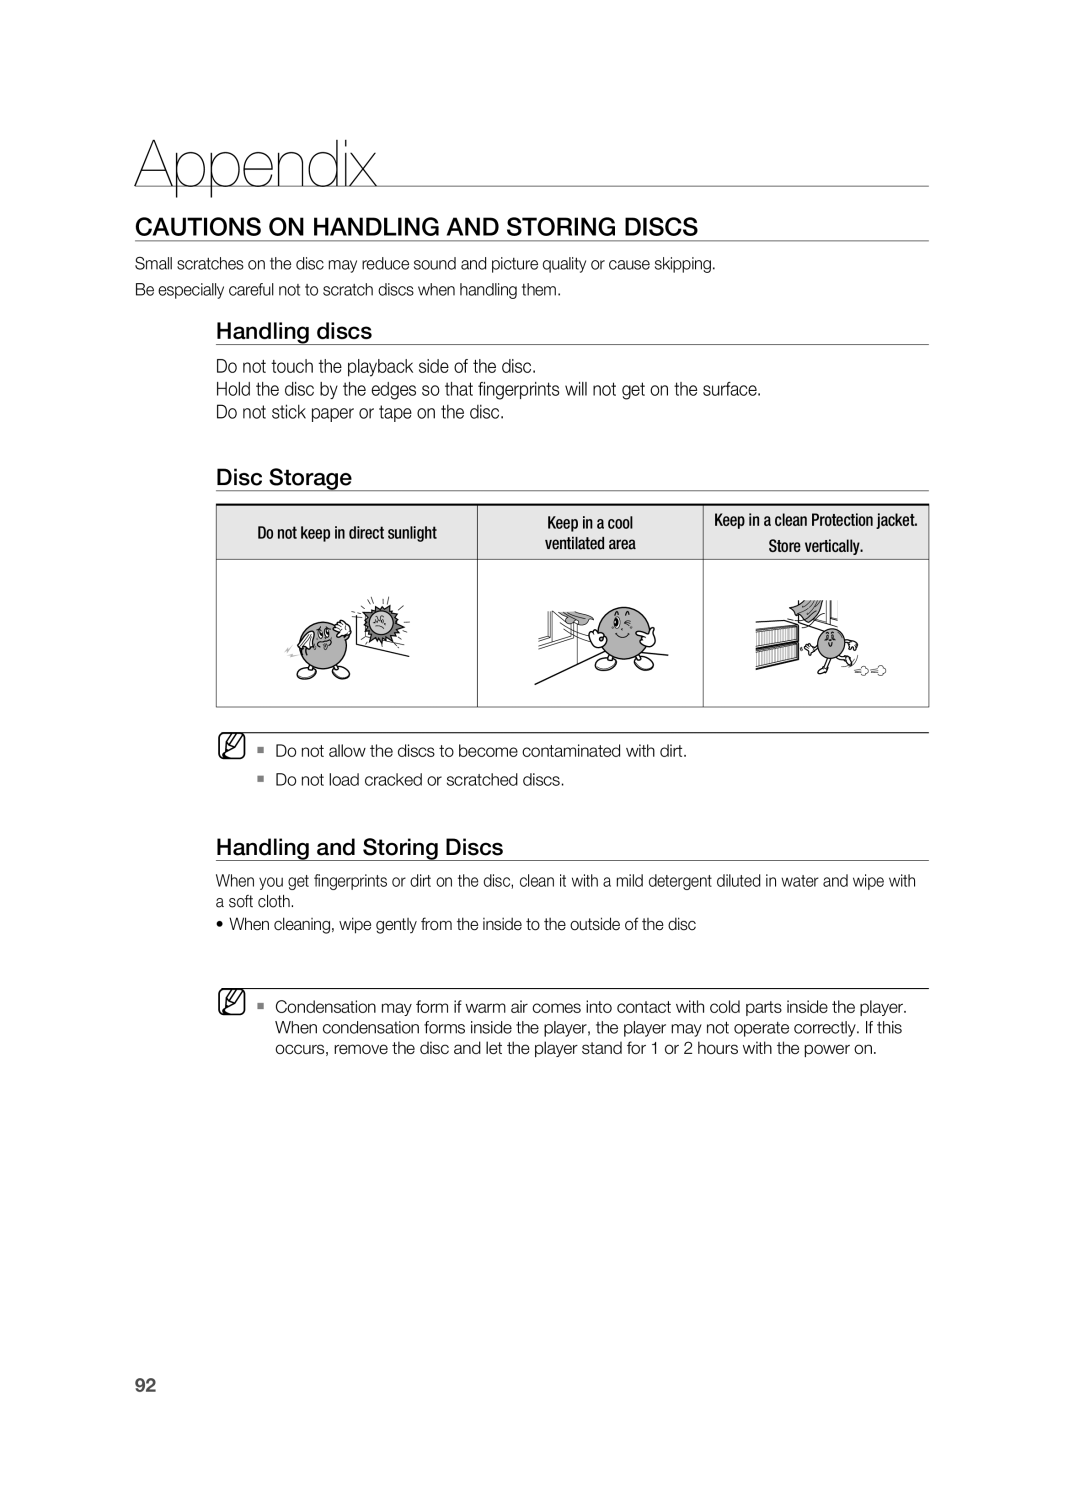 Samsung HT-BD8200 user manual Appendix, Cautions On Handling And Storing Discs, Handling discs, Disc Storage 